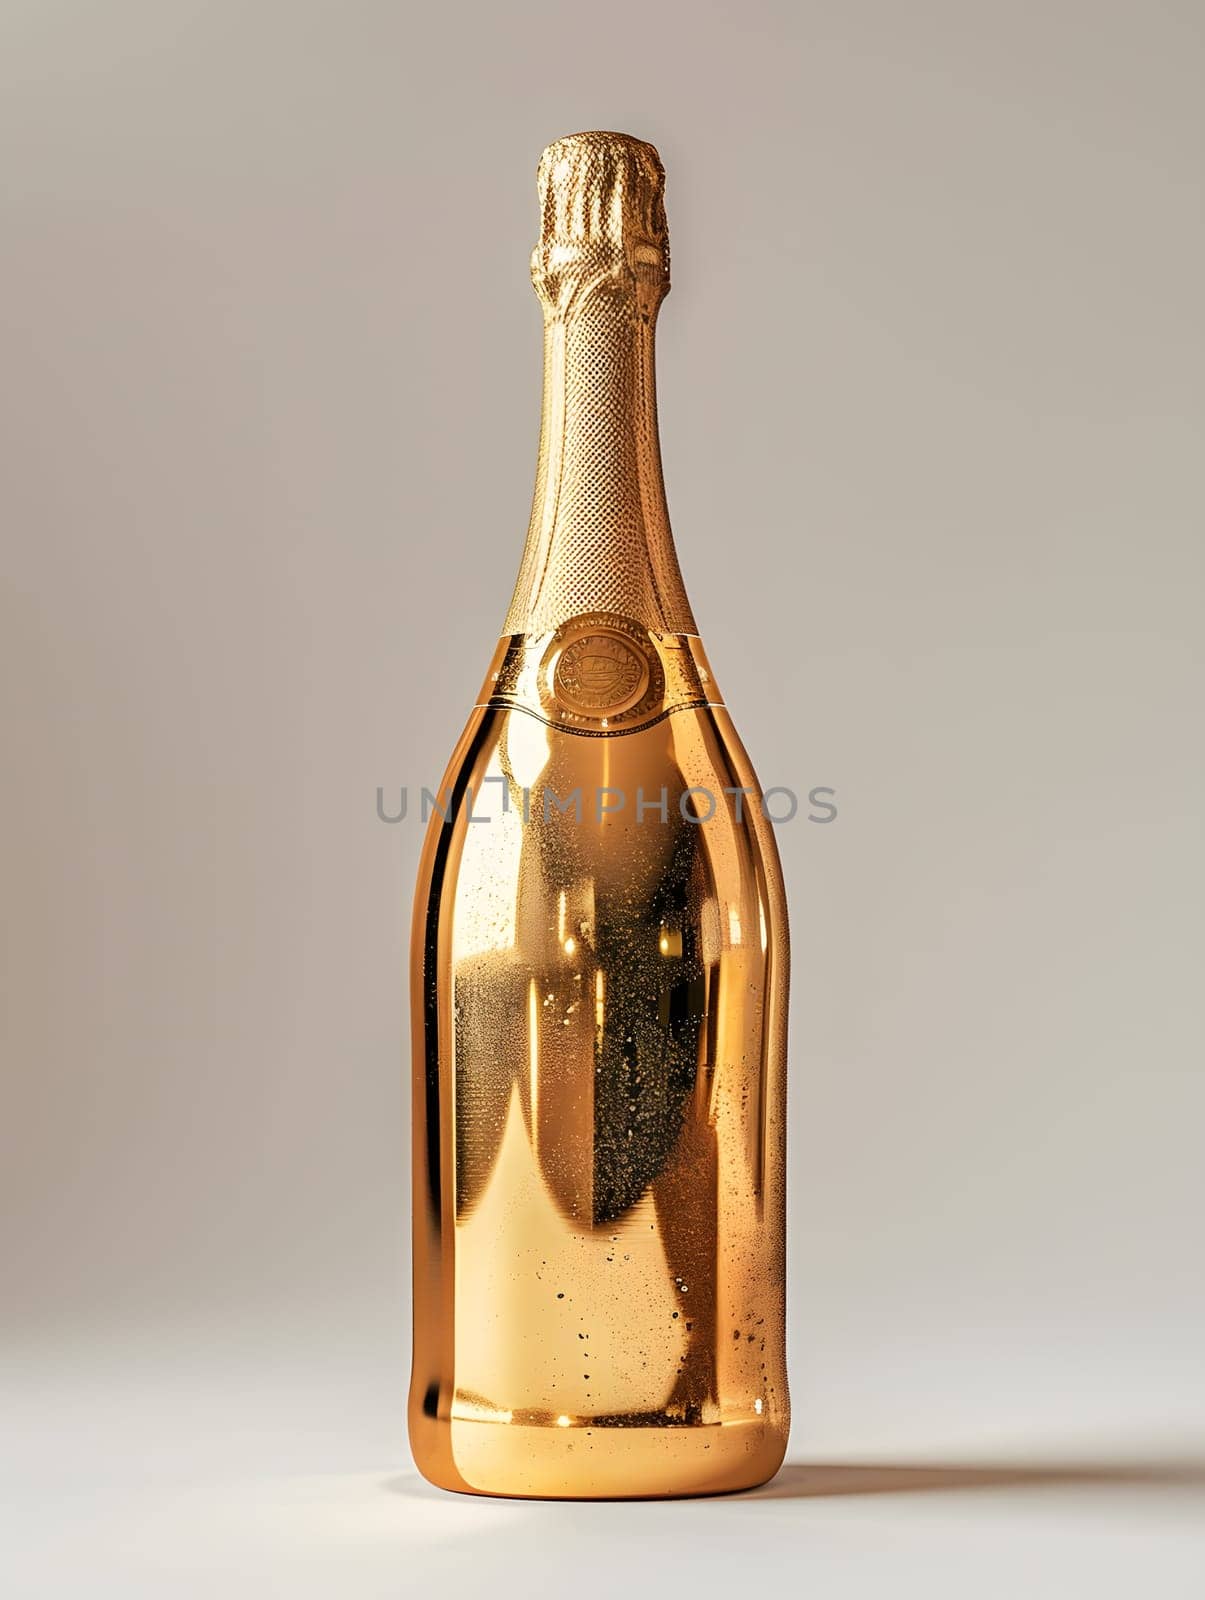 A luxurious bottle of champagne, complete with a bottle stopper and golden accents, is elegantly displayed on a sleek white surface